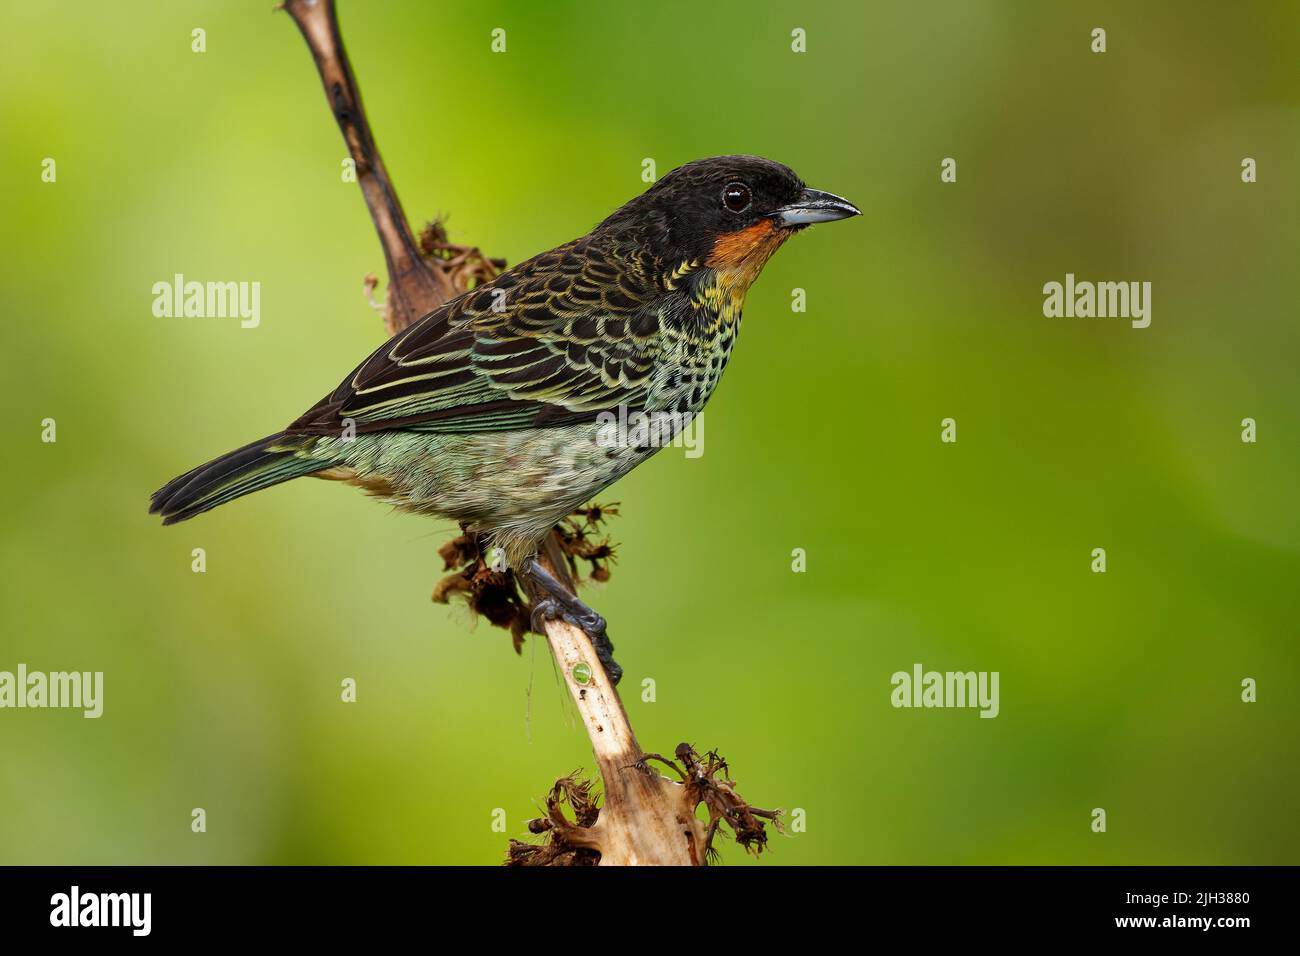 Rufous-throated Tanager - Ixothraupis rufigula bird in Thraupidae, found in Colombia and Ecuador in subtropical or tropical moist montane forests and Stock Photo